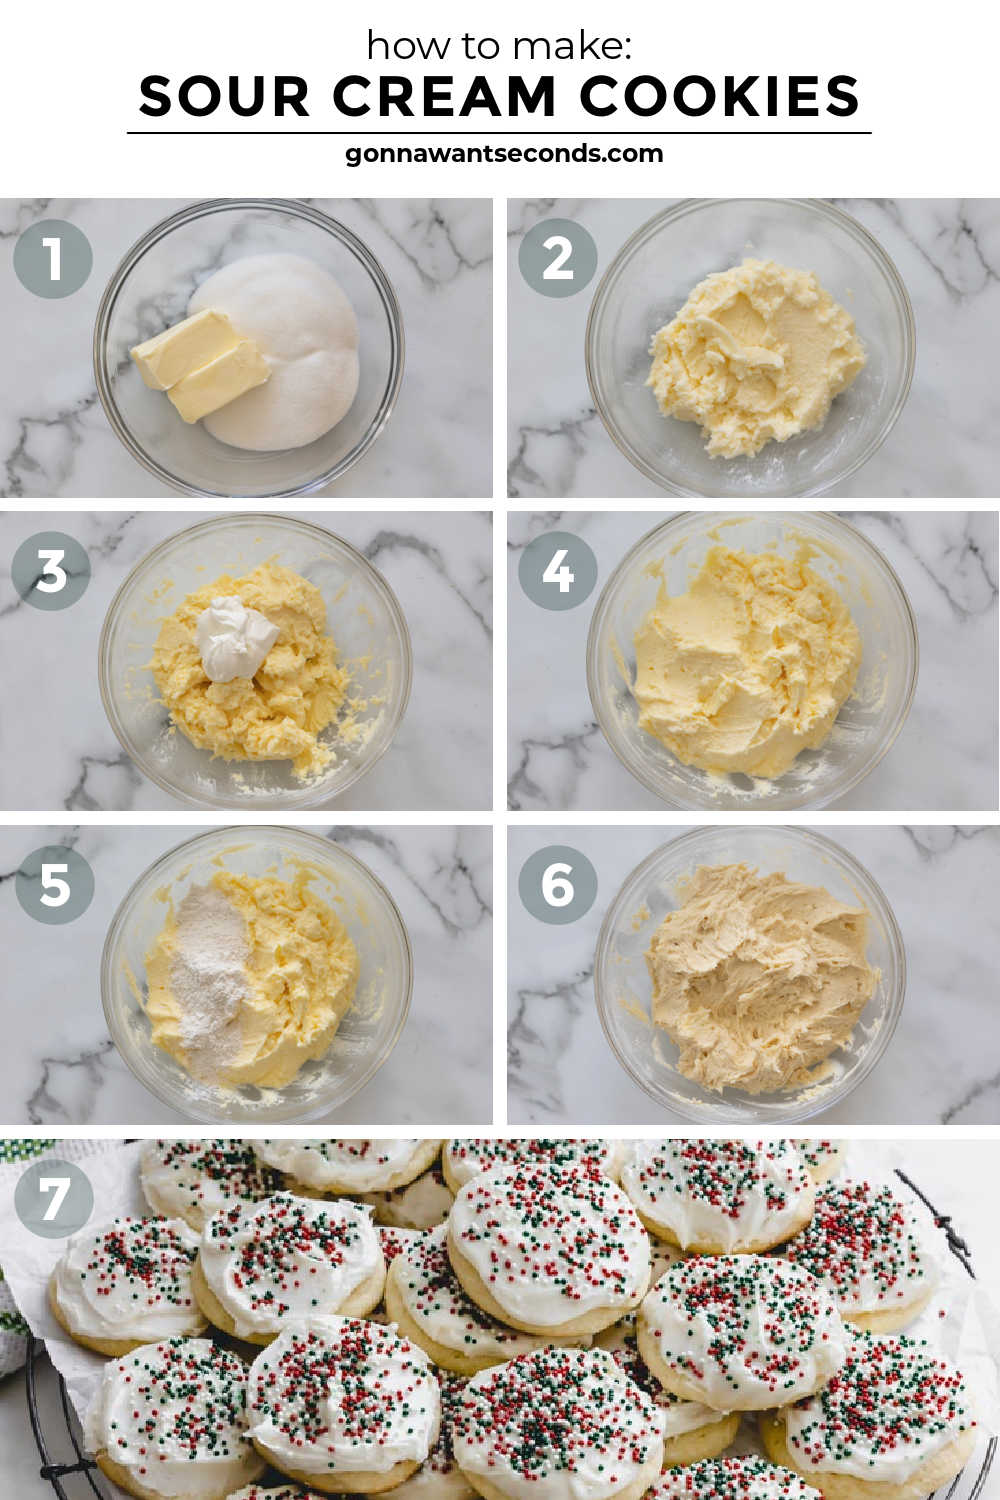 step by step how to make sour cream cookies